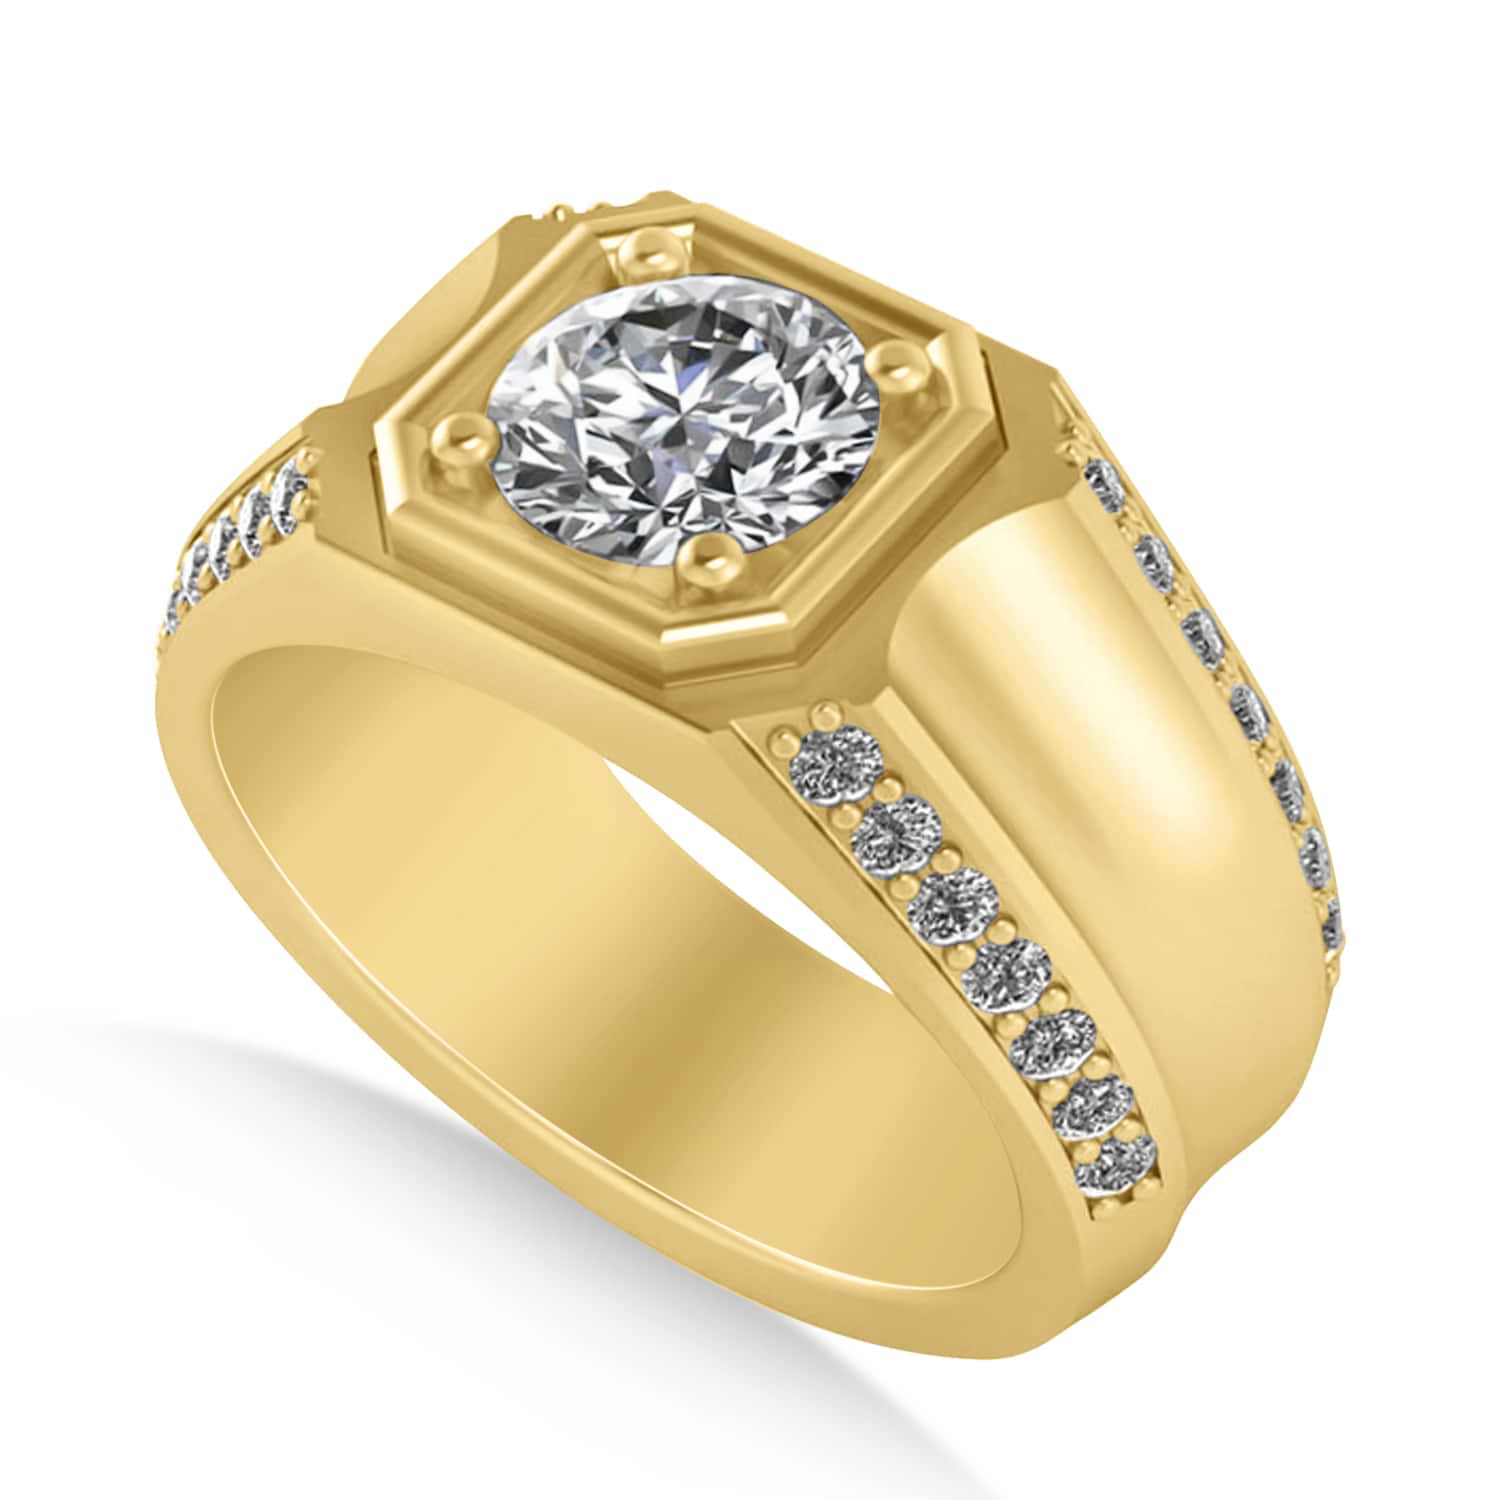 Lab Grown Diamond Accented Men's Engagement Ring 14k Yellow Gold (2.06ct)